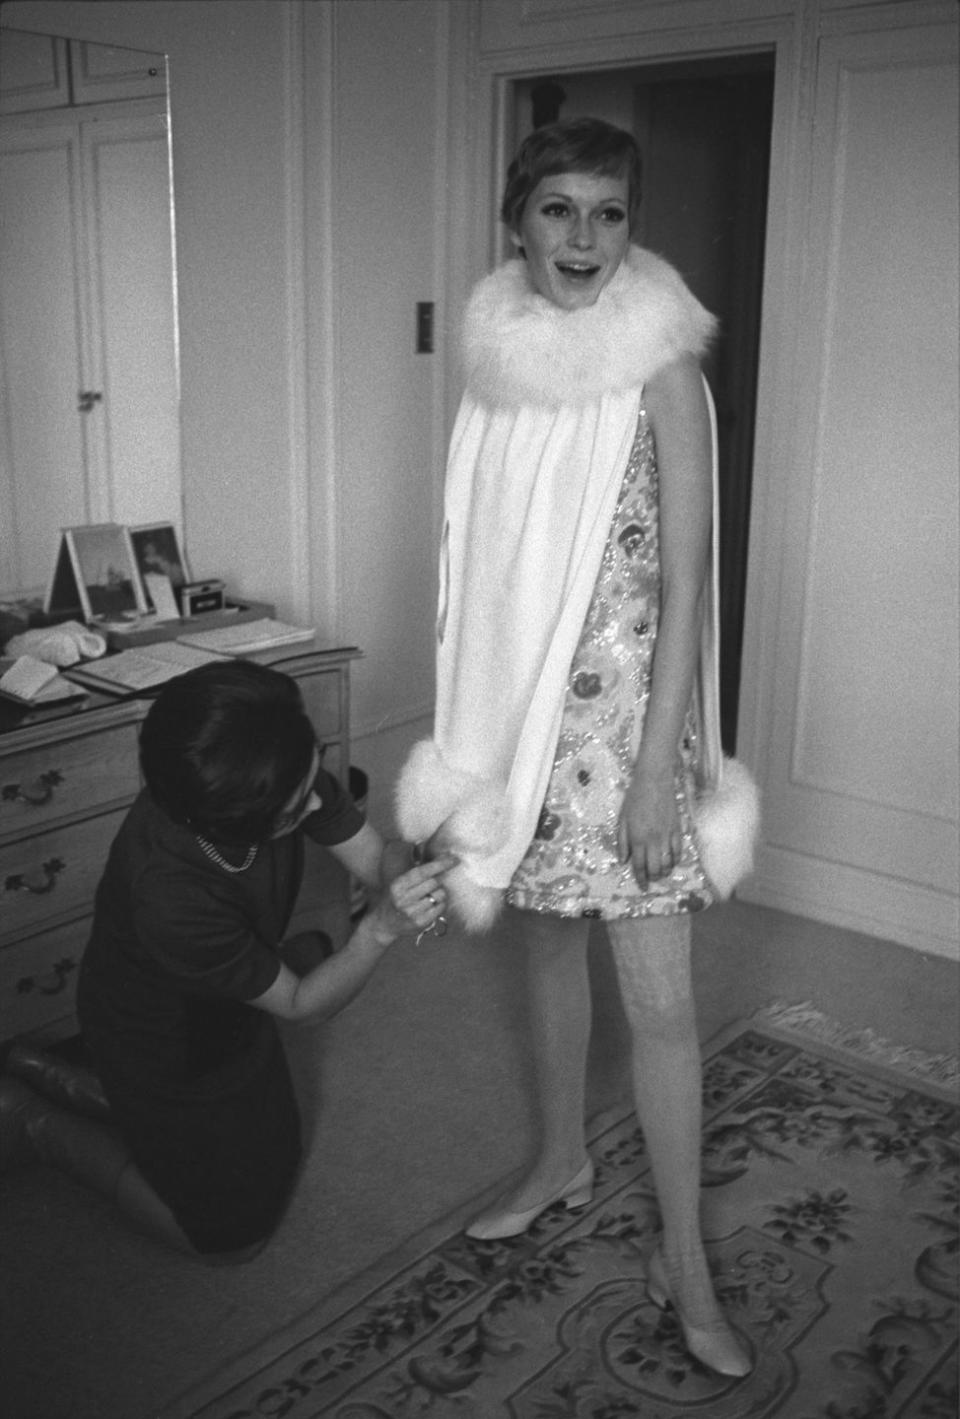 <p>Farrow during a costume fitting for <em>A Dandy in Aspic</em> in 1967. The film, released in 1968, was one of many projects Farrow starred in that year.</p>